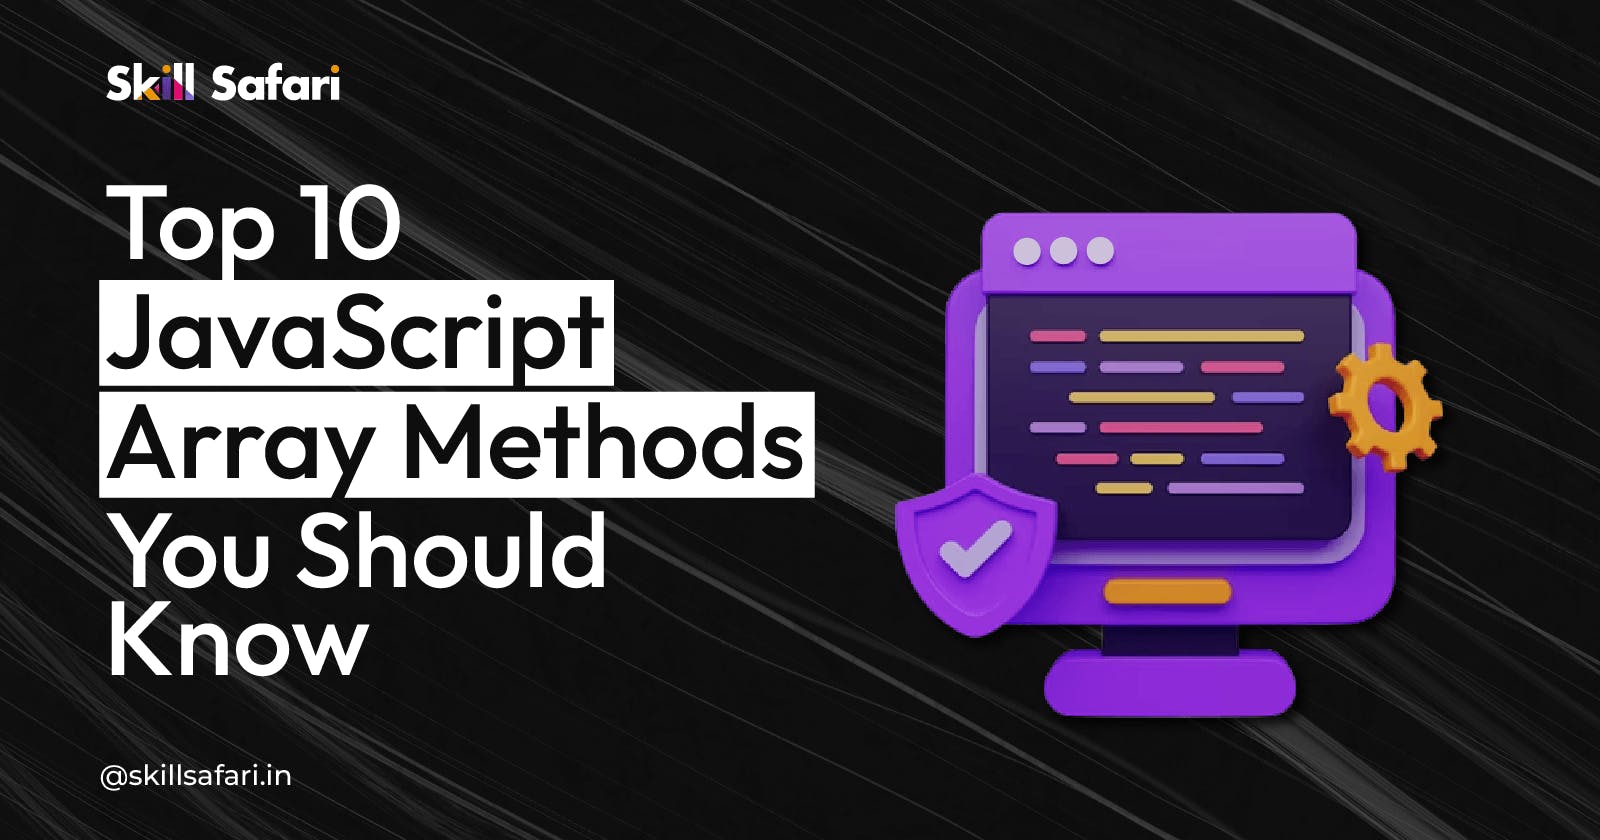 Top 10 JavaScript Array Methods You Should Know